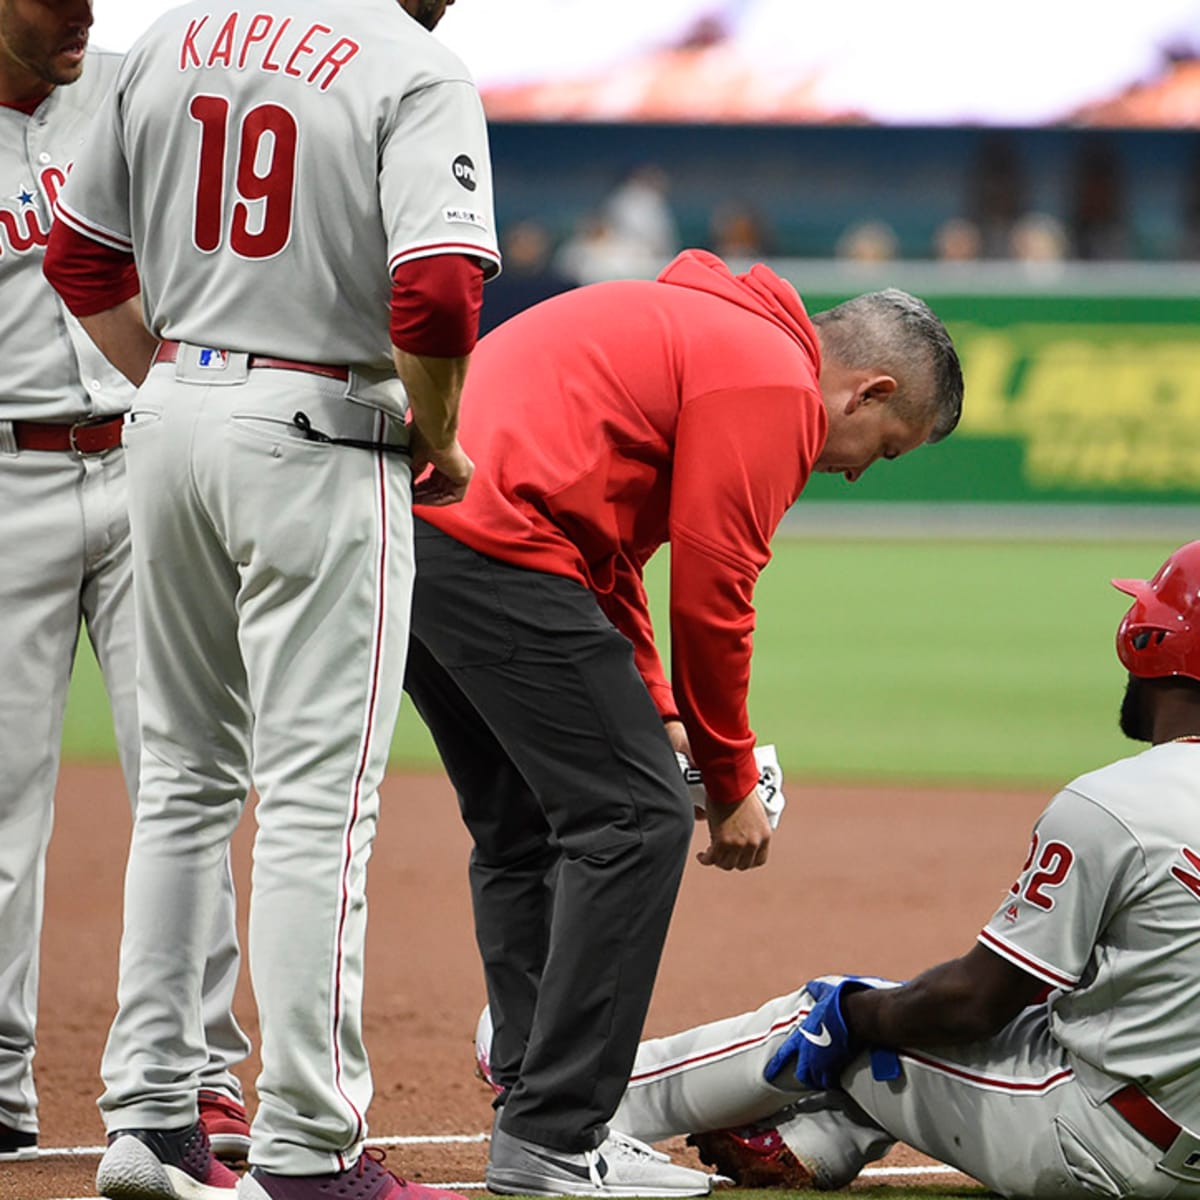 Andrew McCutchen injury news: Phillies OF out for 2019 with ACL tear -  Sports Illustrated